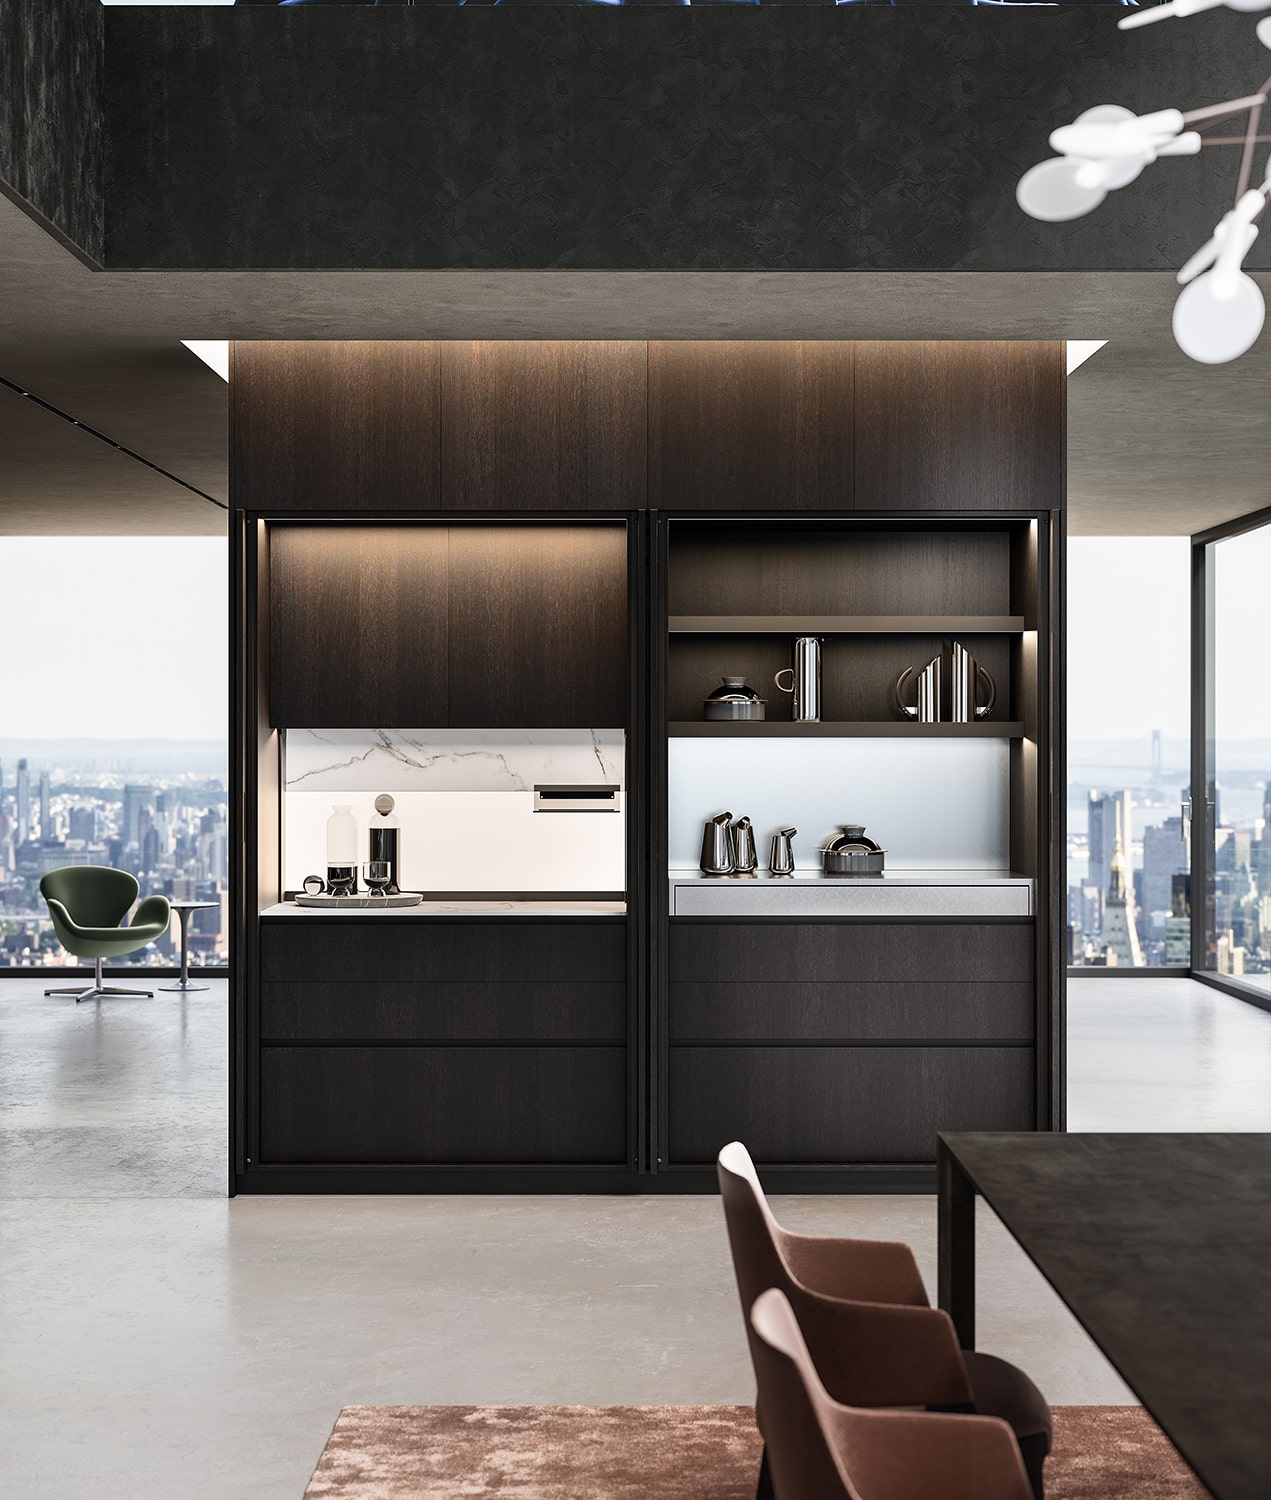 Tall cabinets with two Wing units. In each unit, pocket doors fold out of view to reveal a customized space which can include: drawers, shelves, accessorized LED-lit back panel, integrated and counter appliances, and pull-out stainless steel tops for extra surfaces.